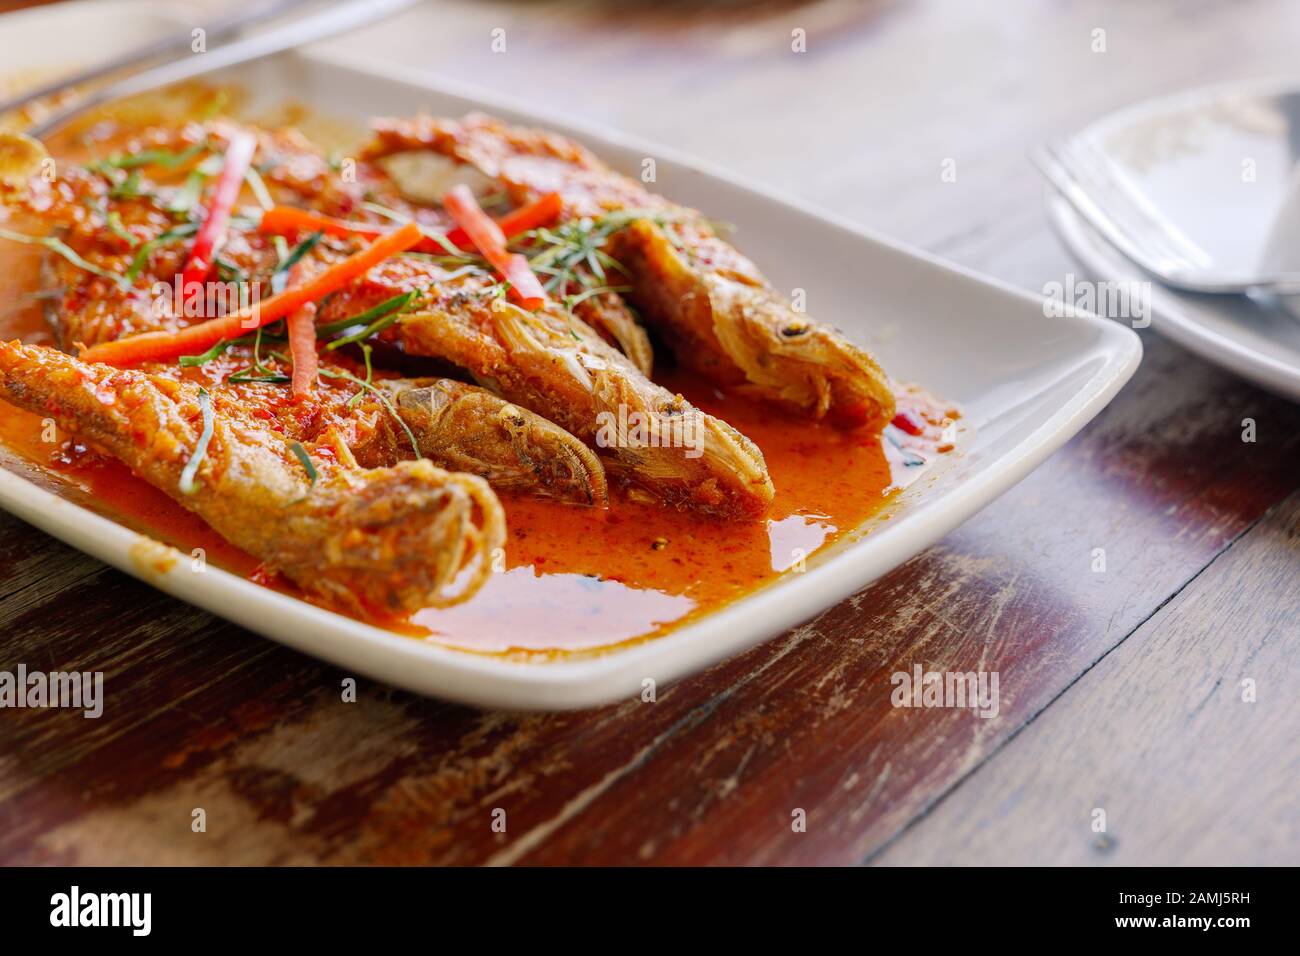 Close up view of Spicy Red Curry with crispy fried soft fish, Sheatfish, on white dish and wooden table. Stock Photo